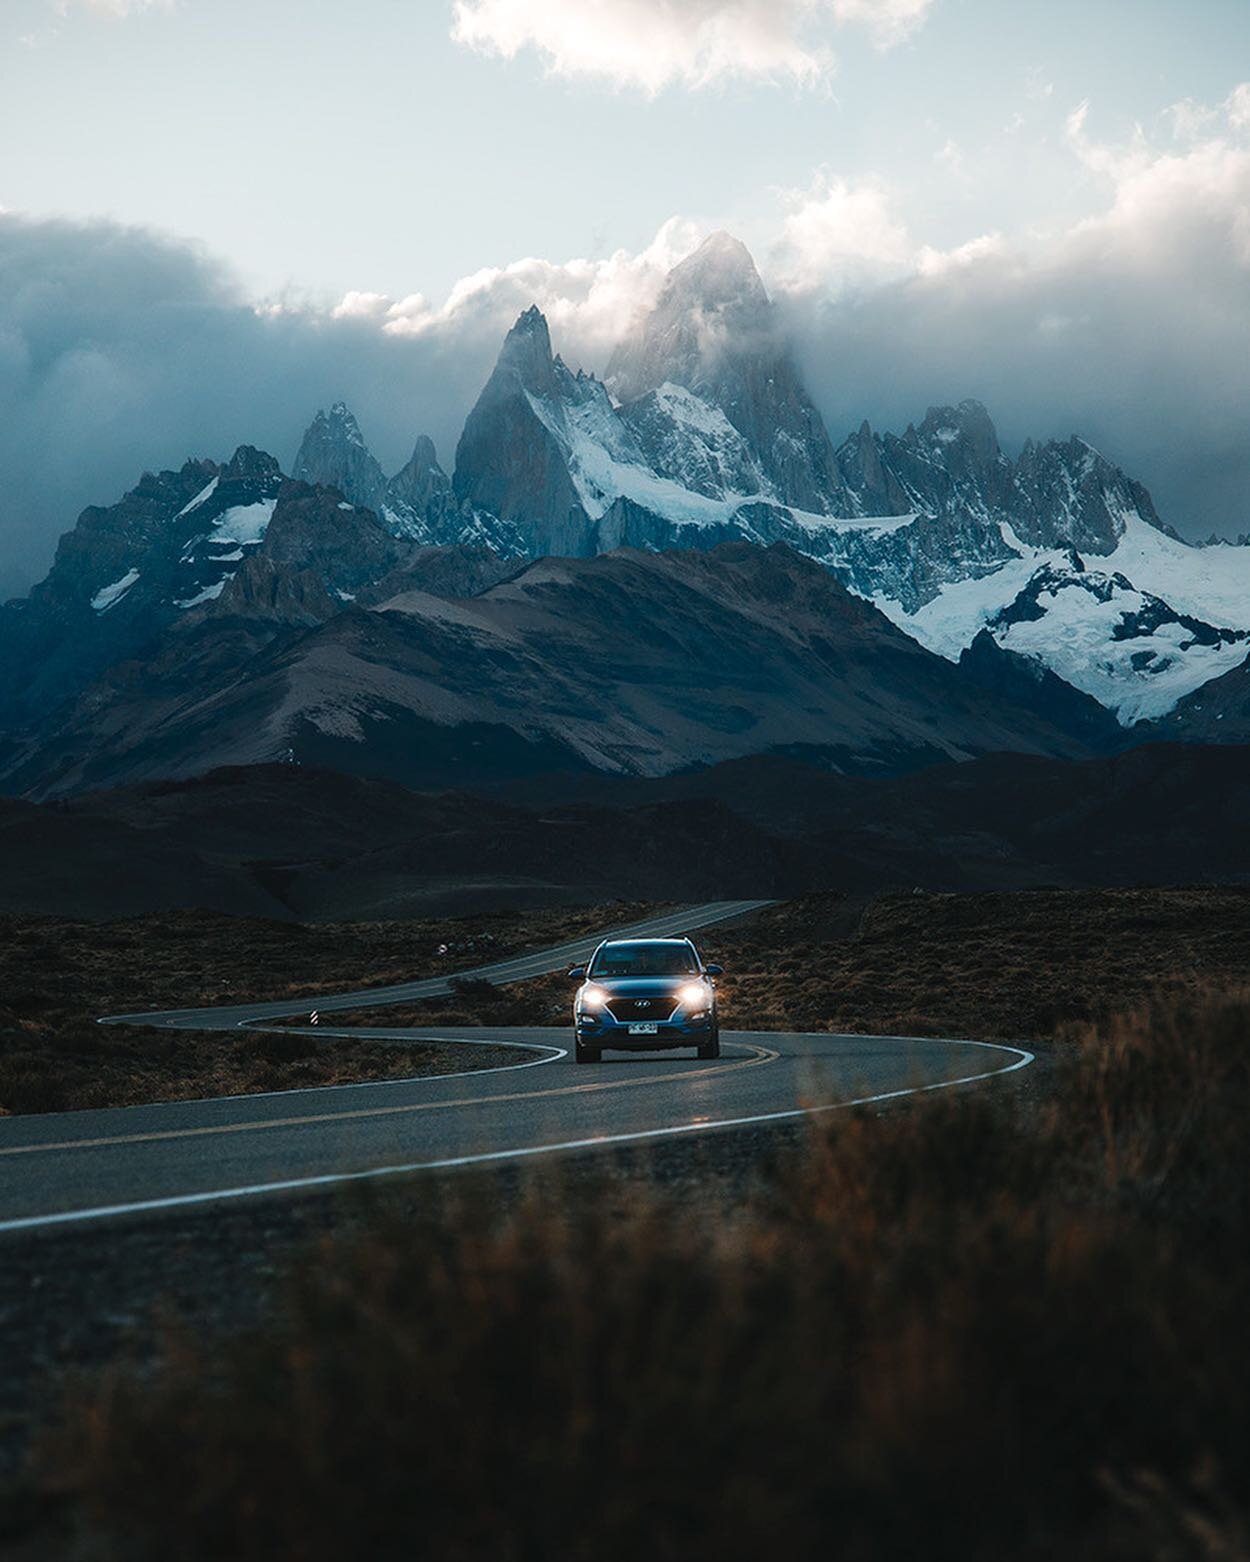 Swipe to see sunrise. 🌚 🌝 Which one do you like better? Let me know in the comments. 👇🏼
.
.
.
#patagonia #elchalten #fitzroy #hyundai